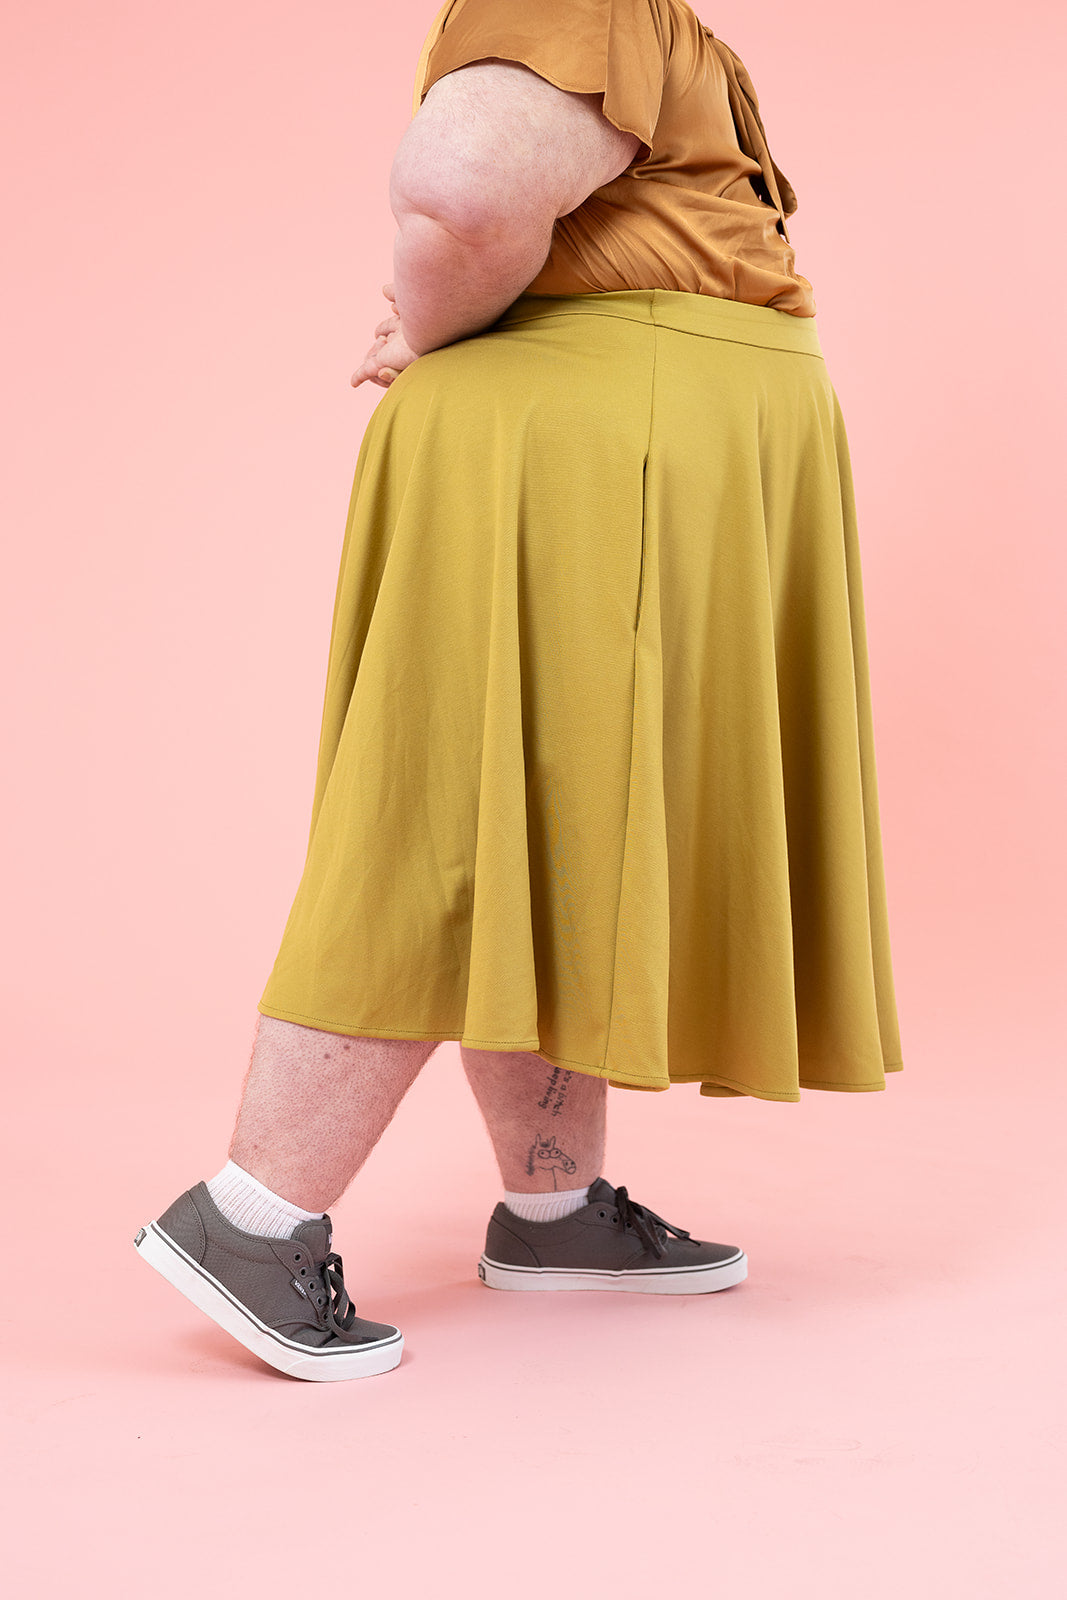 A person is shown from the waist down wearing a bronze silk shirt and a mustard colour skirt with grey sneakers. They have several tattoos. 